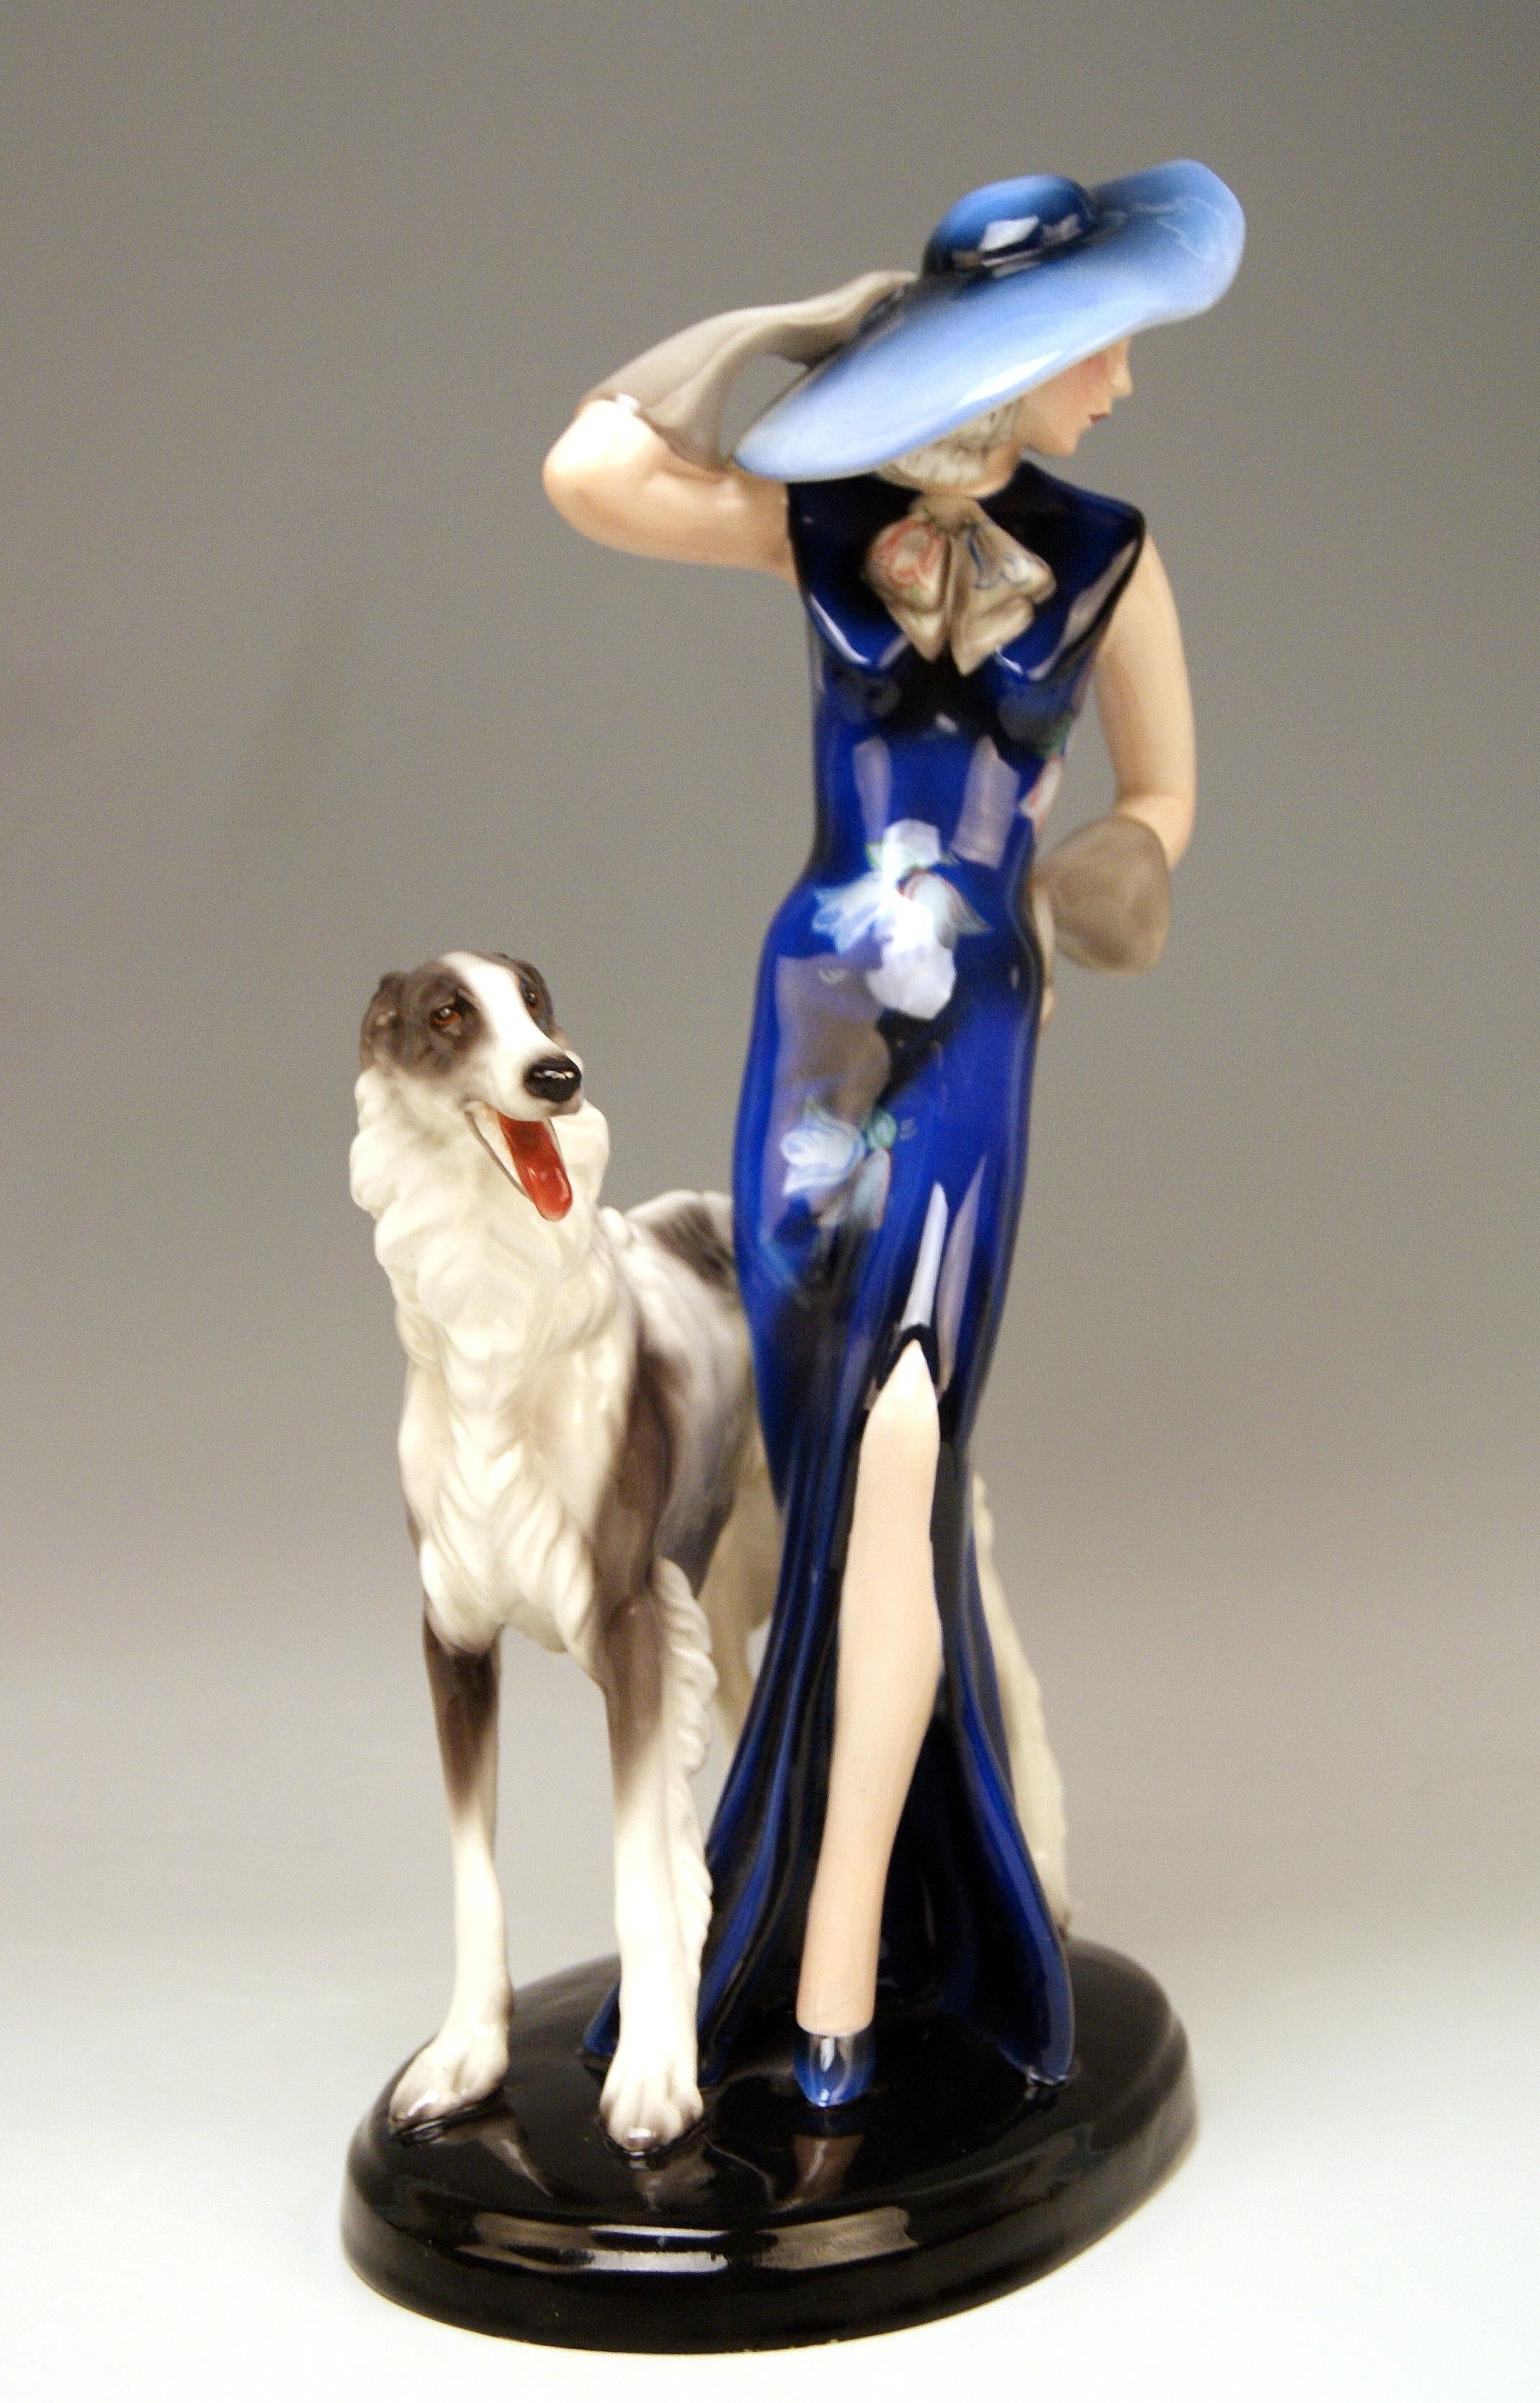 Painted Goldscheider Vienna Lady with Russian Greyhound Dog Model 7367 Claire Weiss 1936